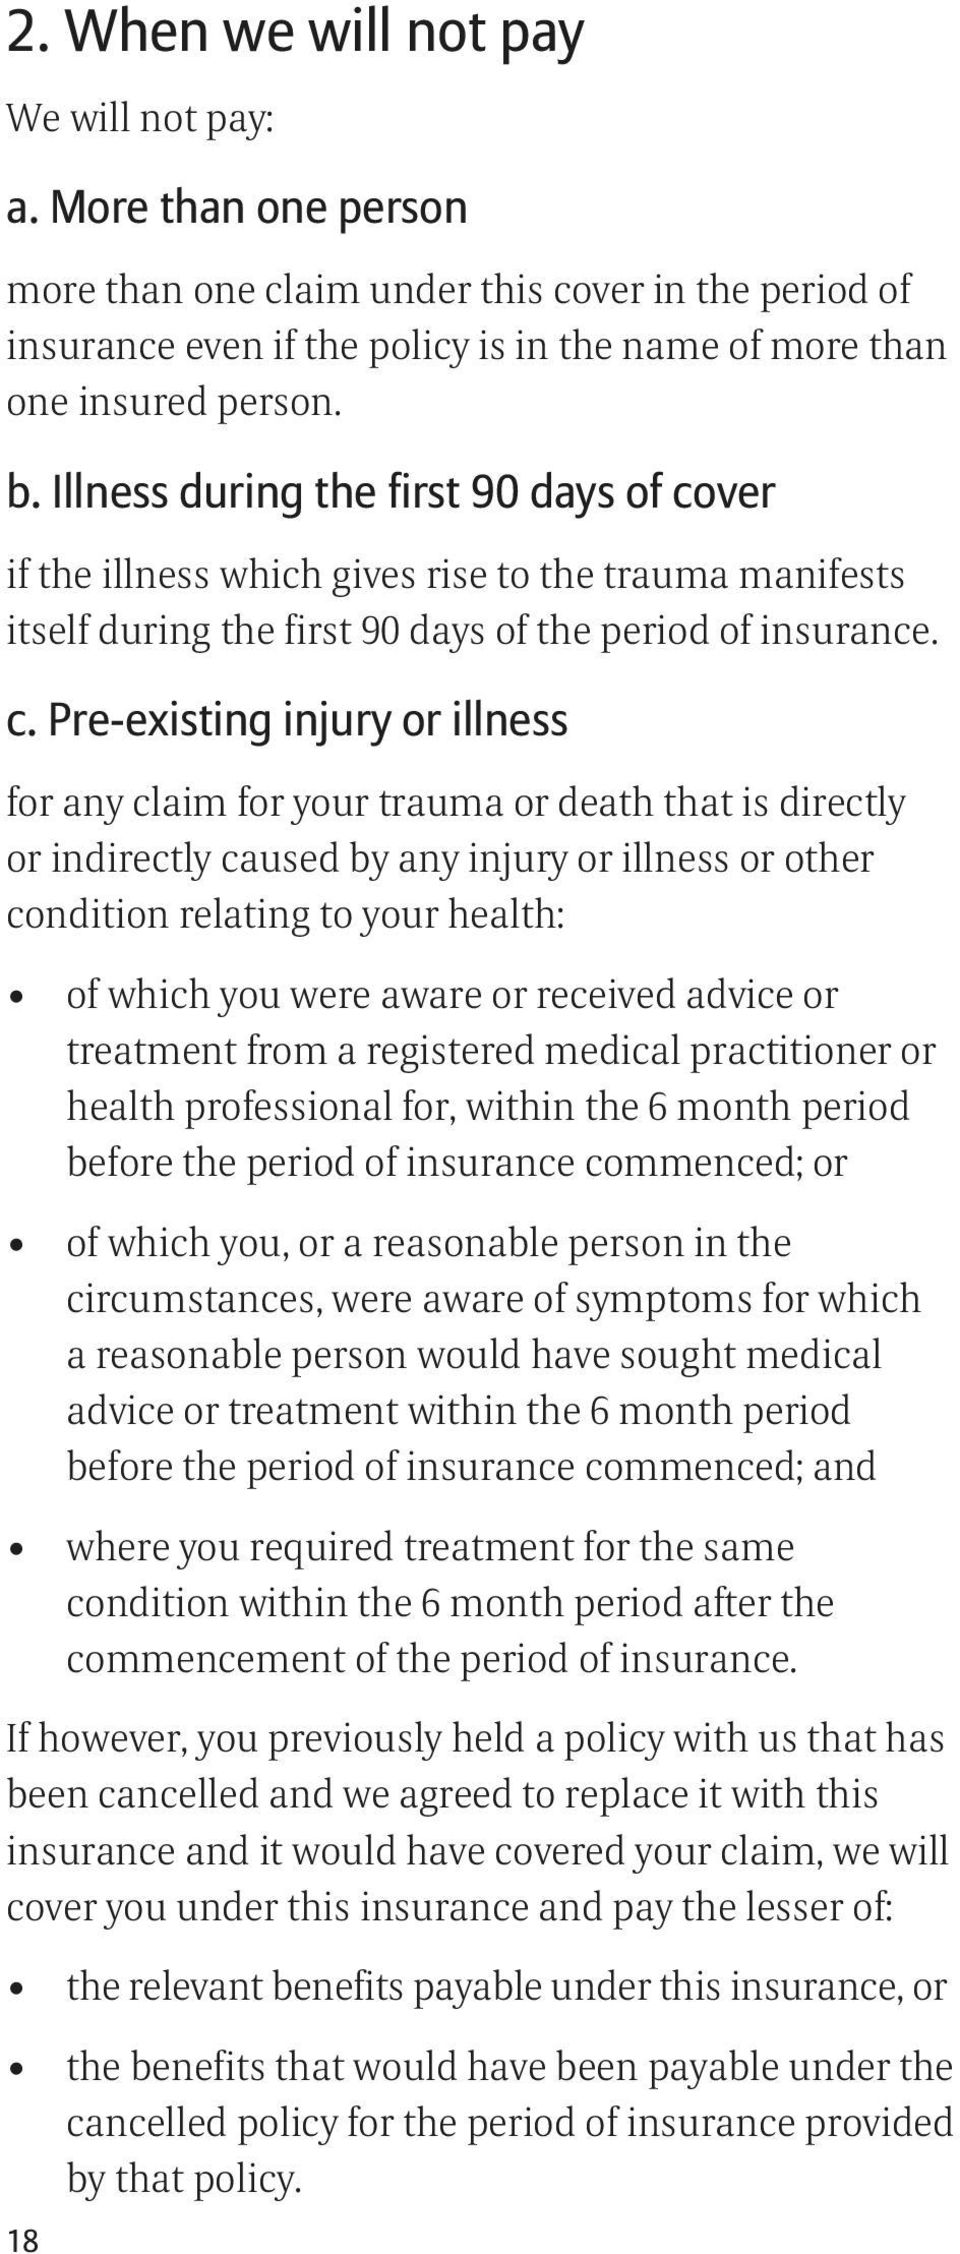 ver if the illness which gives rise to the trauma manifests itself during the first 90 days of the period of insurance. c.